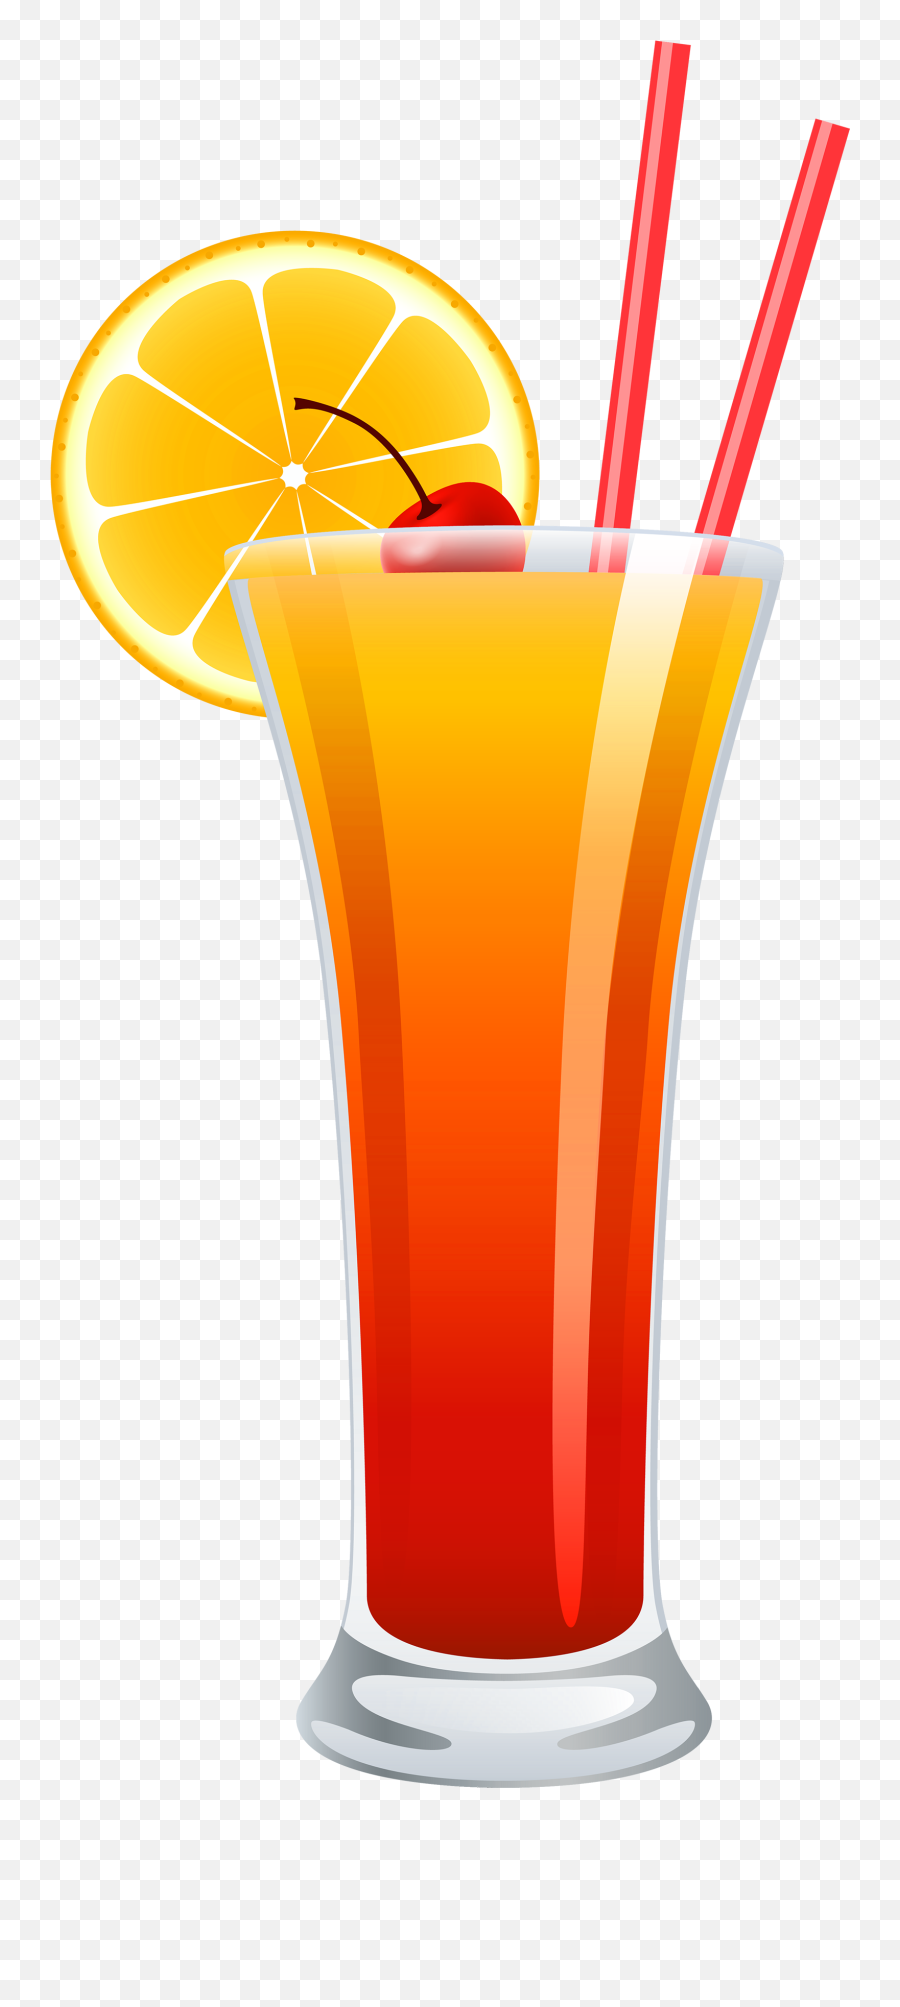 Tequila Sunrise - Tequila Sunrise Cocktail Clipart Png,Tequila Shot Png